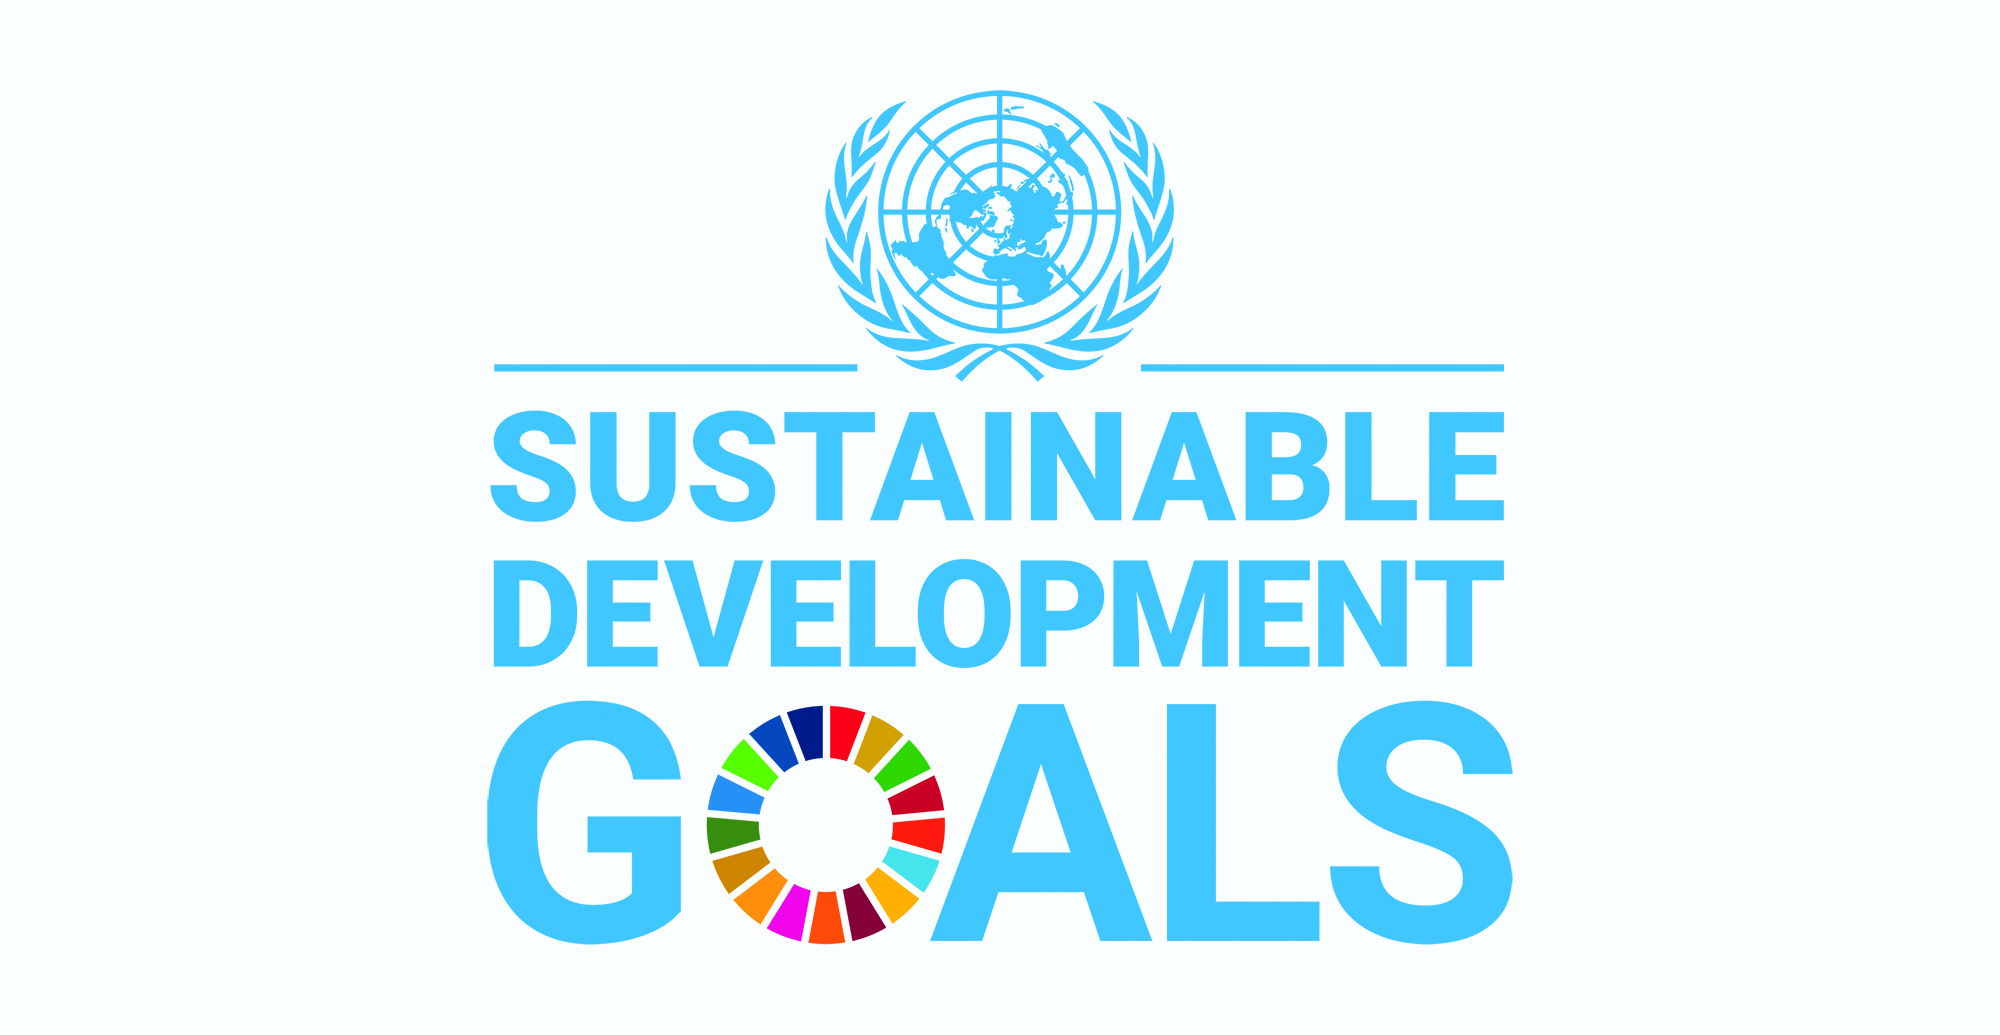 The INTOSAI Working Group on SDGs and KSDI has published its first Newsletter